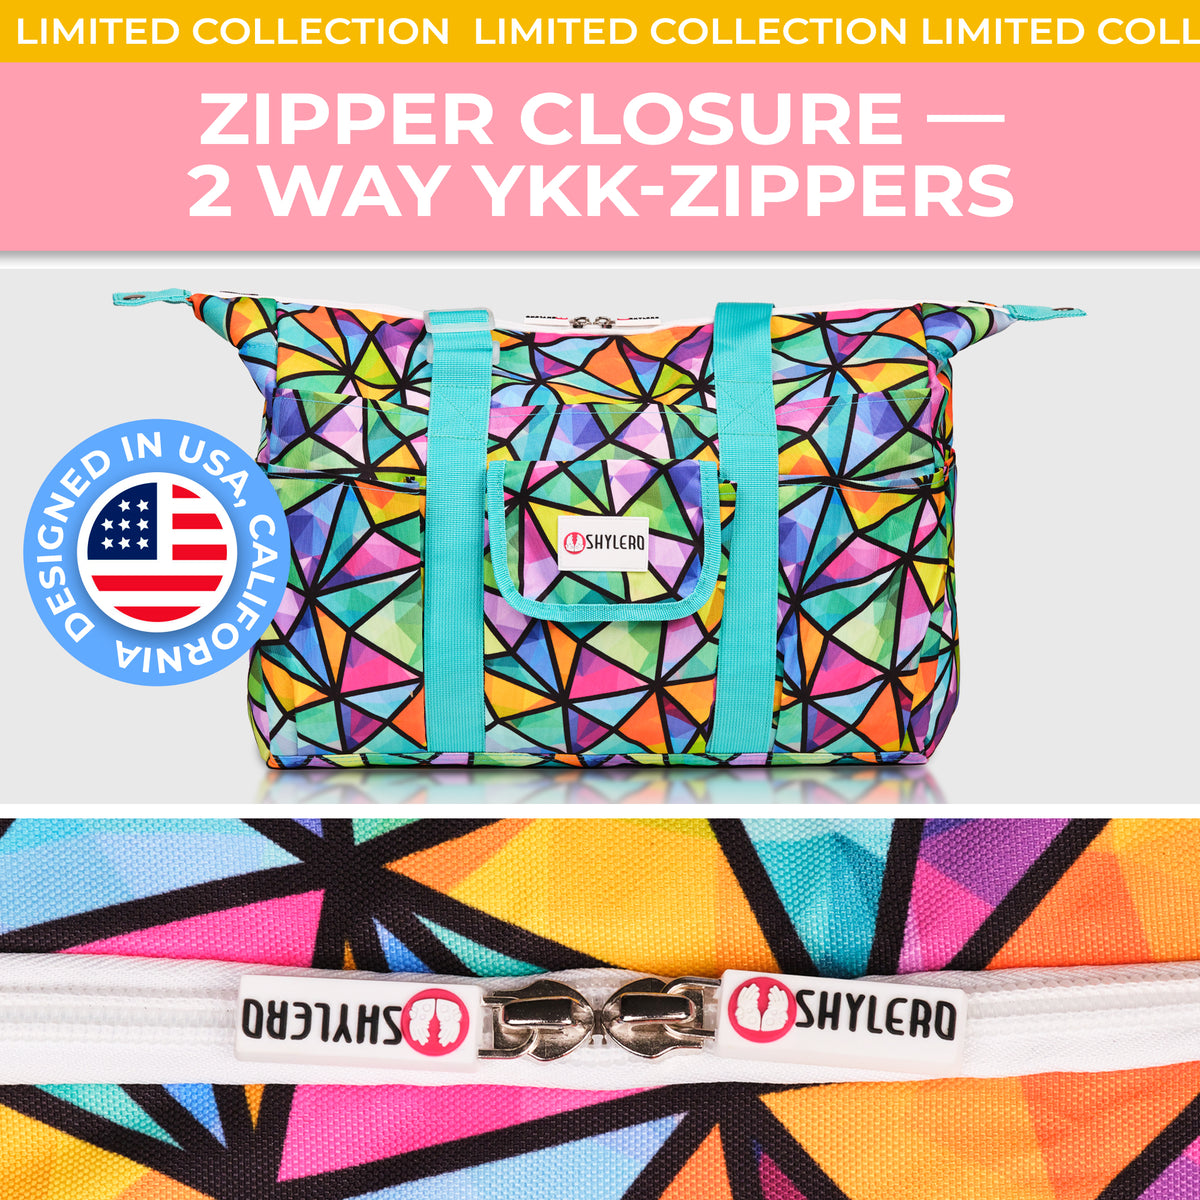 Nurse Bag and Utility Tote | Waterproof | Top YKK® Zip | L18" x H14" x W7" (46x18x36cm) | Stained Glass